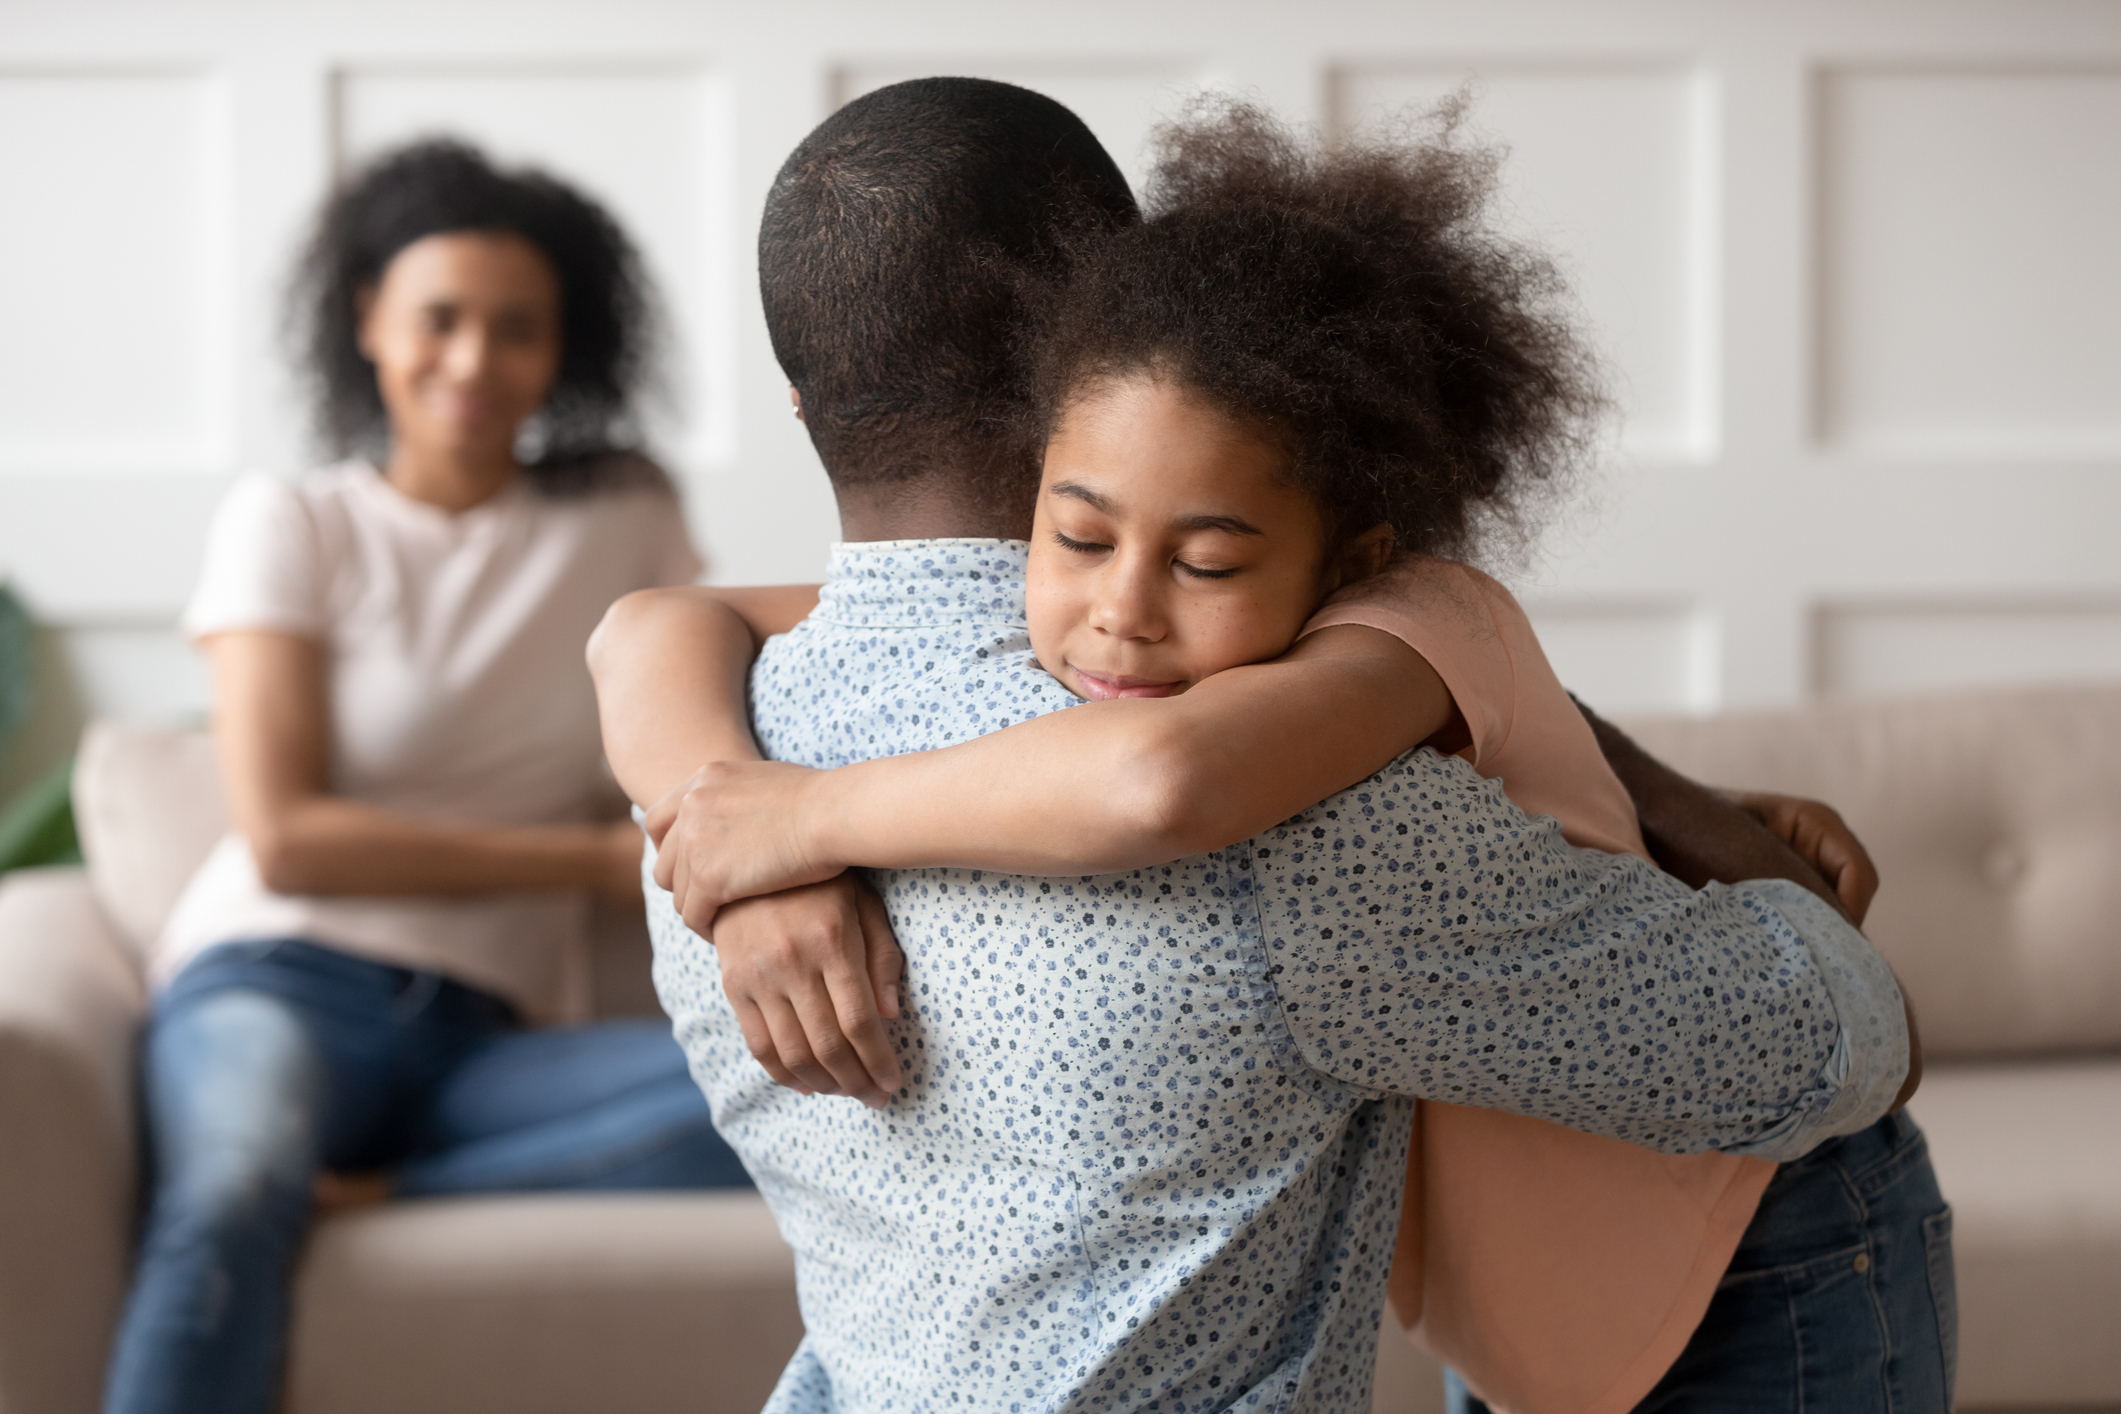 Man embracing young girl, woman smiling in background, family moment at home